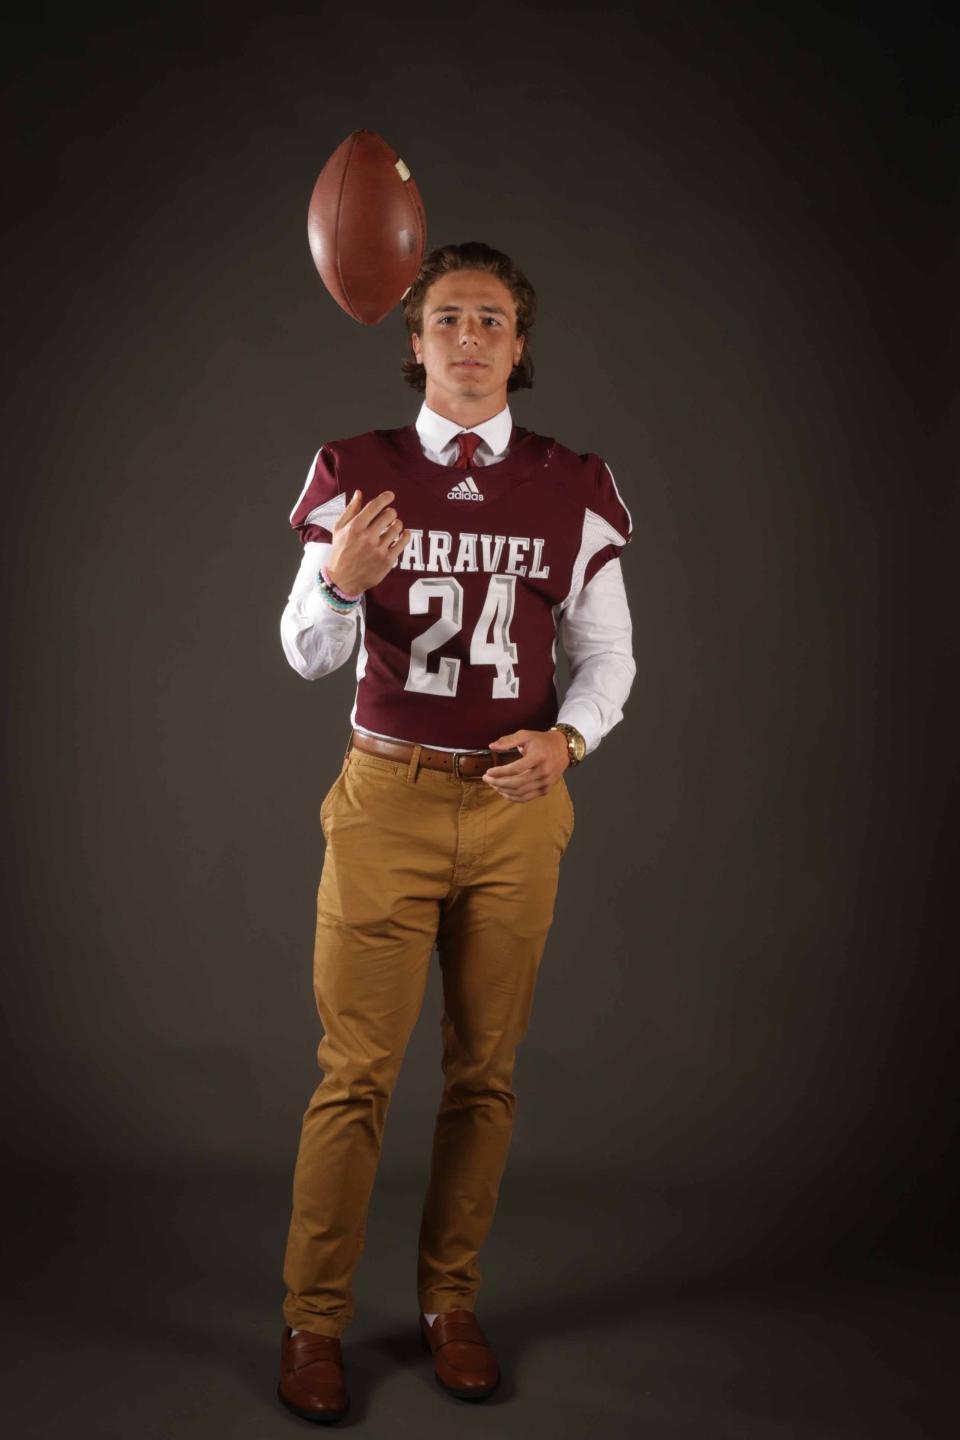 Caravel Academy football player Ethan Potter poses for a portrait at The News Journal's High School Football Media Day Friday, Aug. 9, 2019, at The News Journal offices.